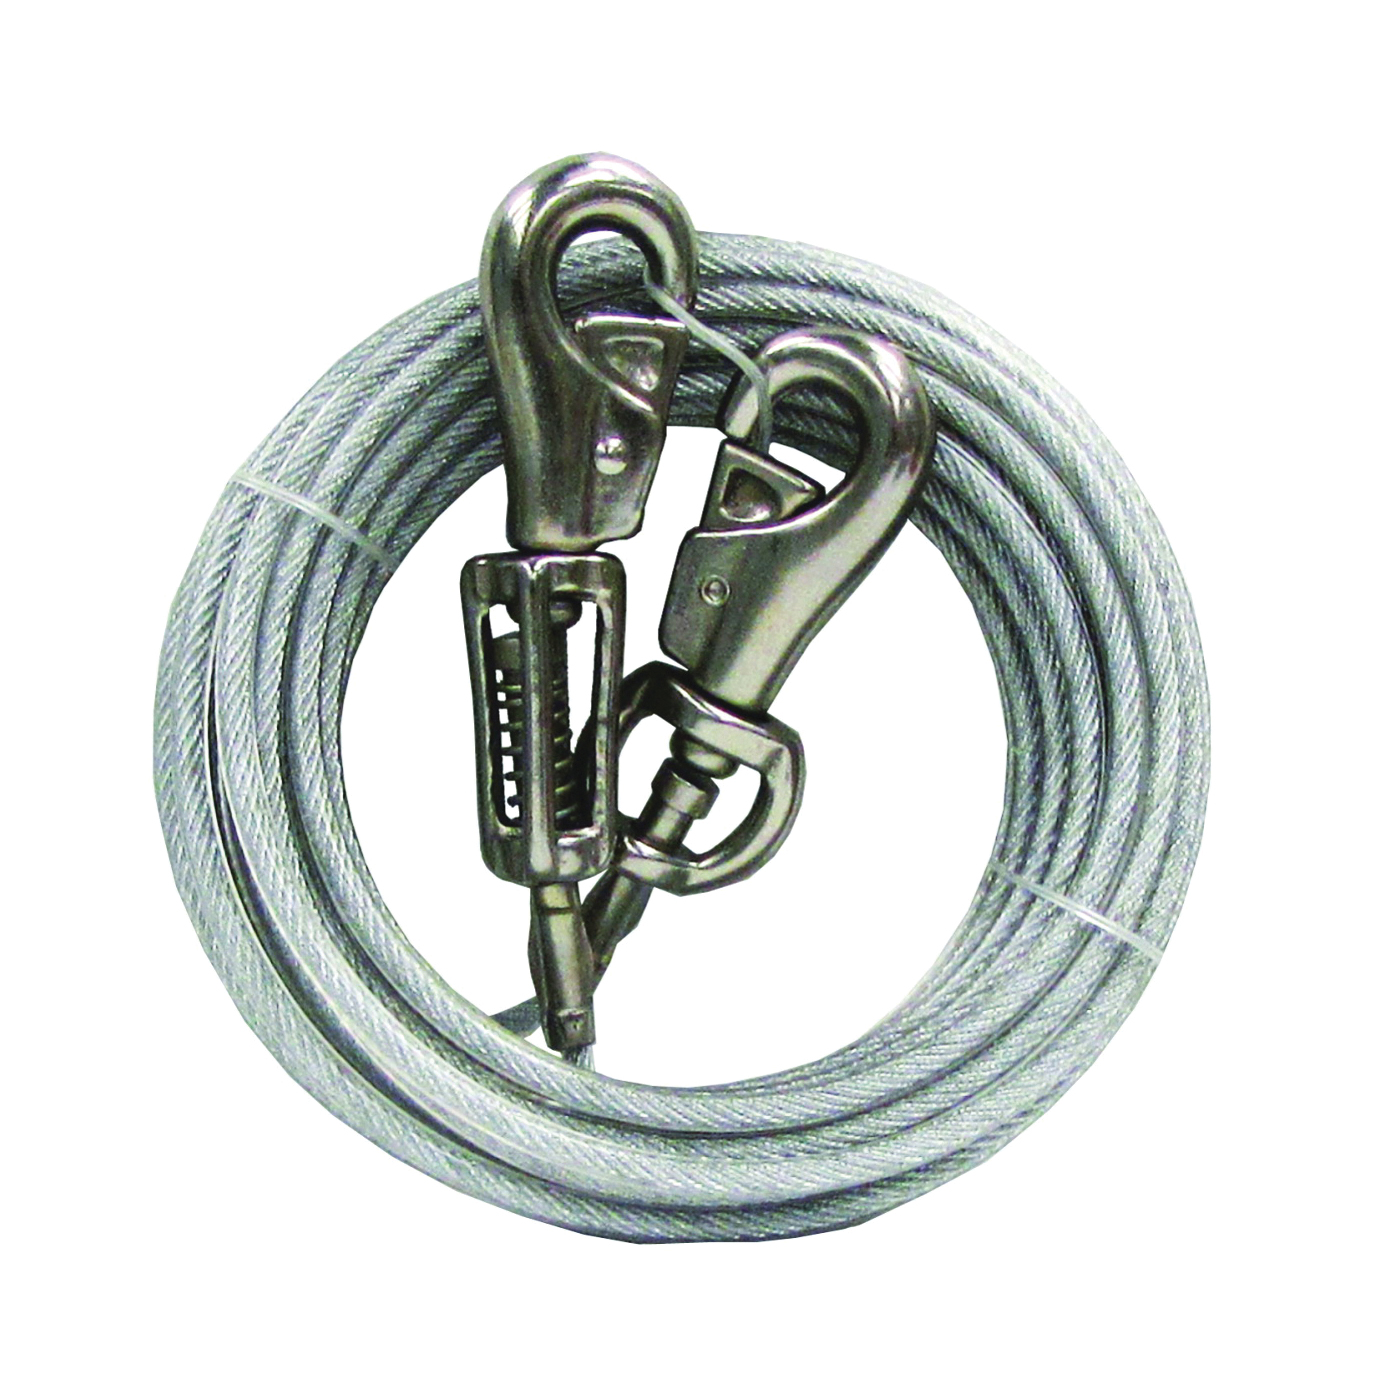 PDQ Q5730SPG99 Tie-Out with Spring, 30 ft L Belt/Cable, For: Extra Large Dogs Up to 125 lb